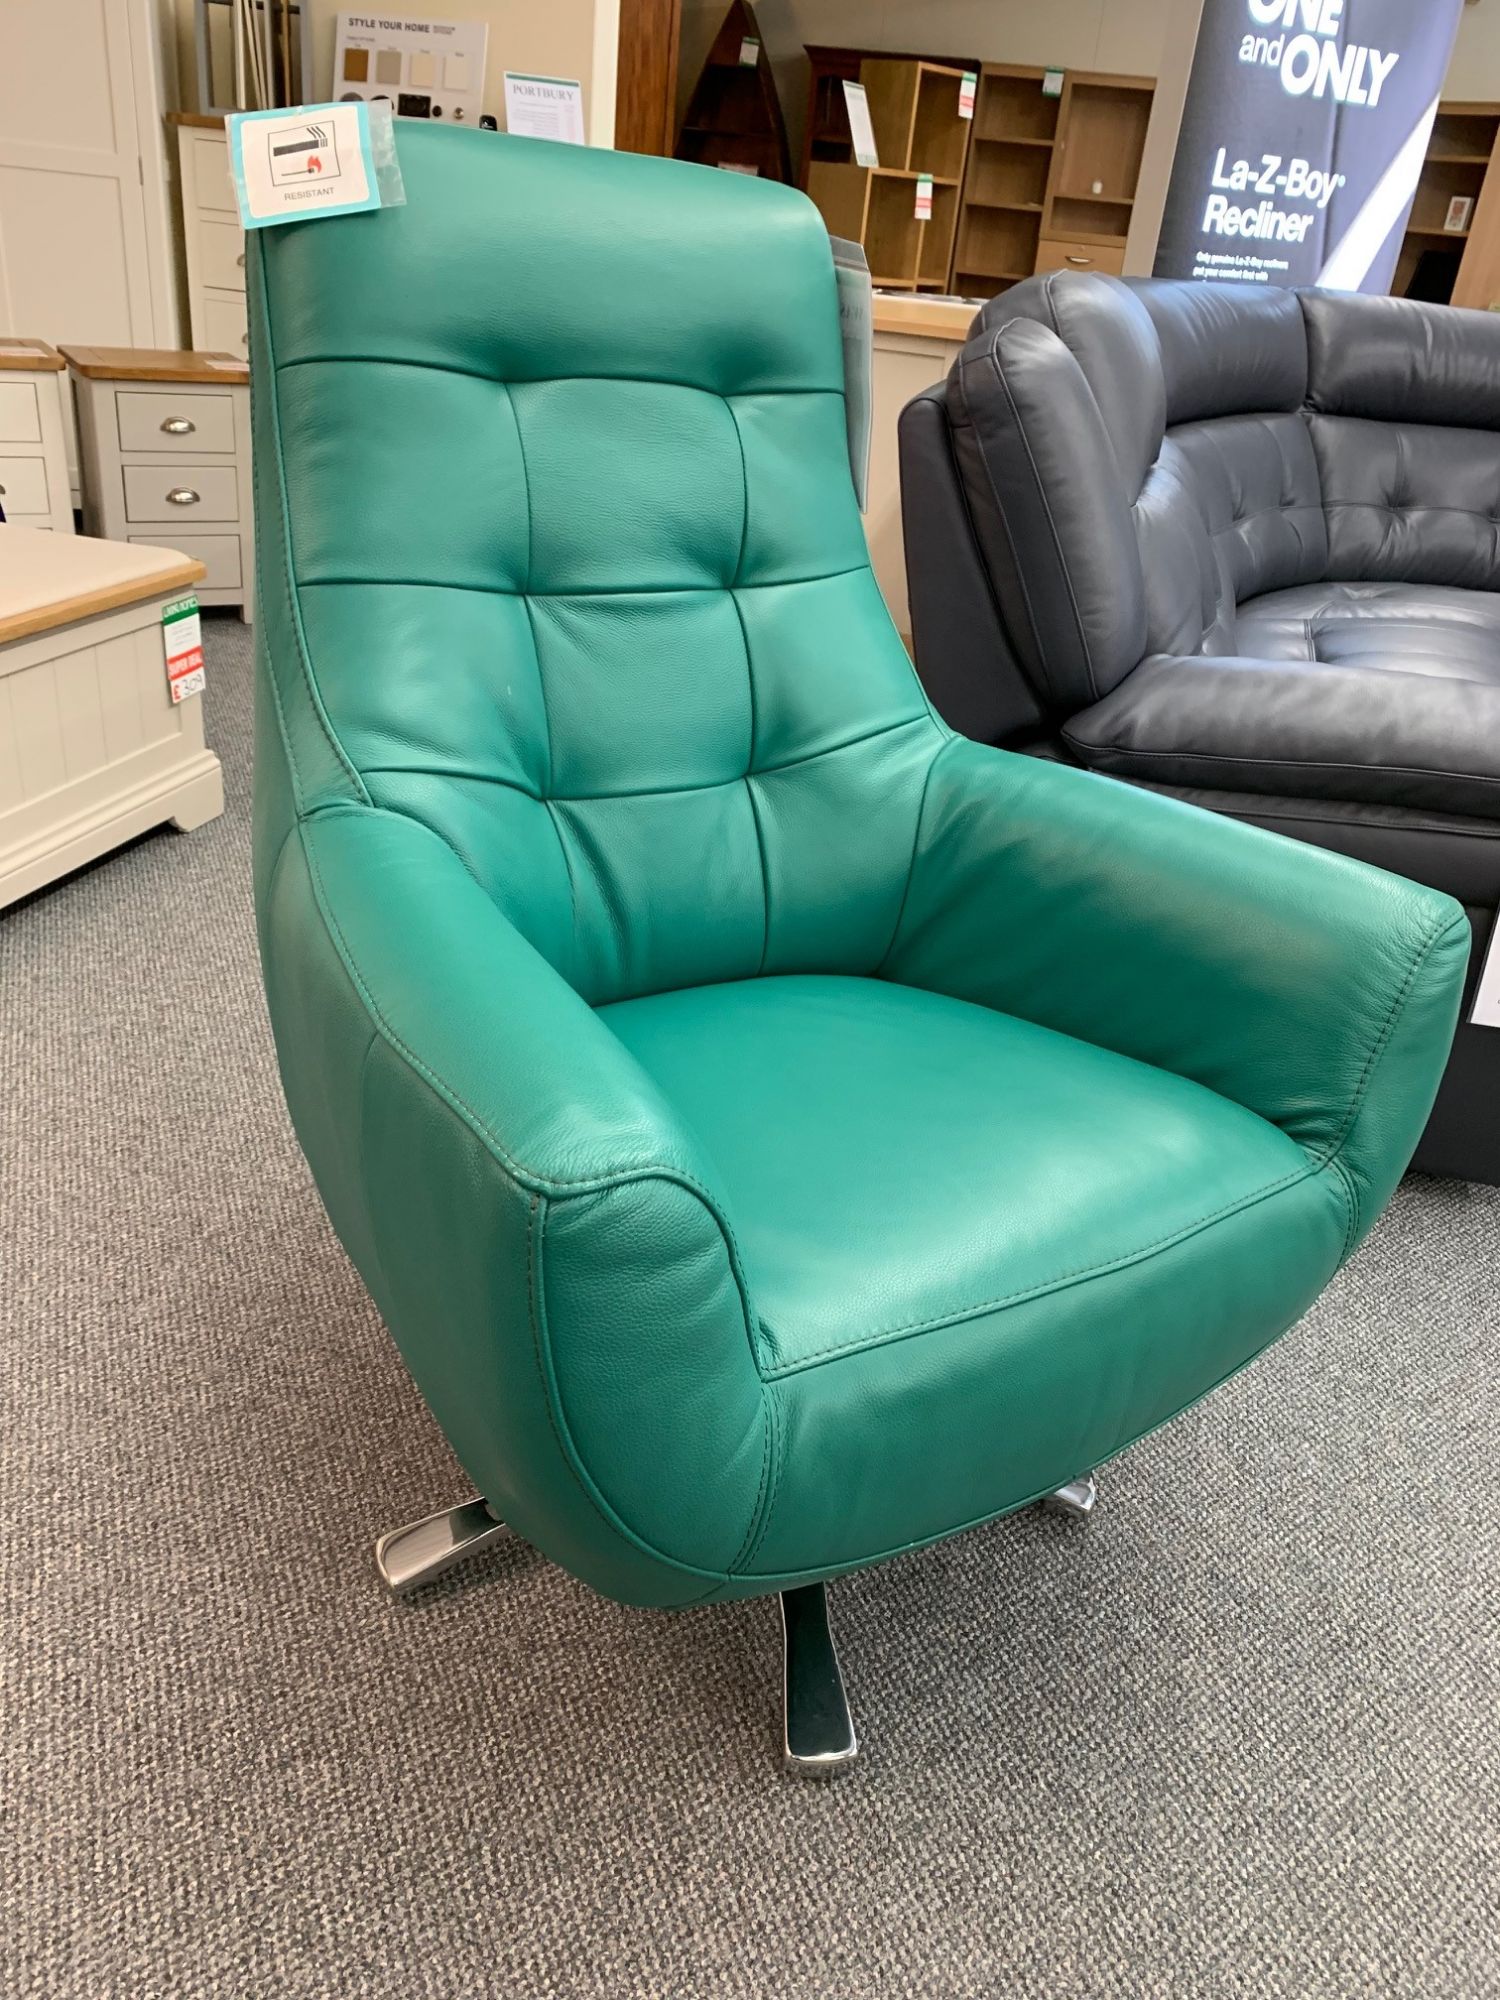 Clearance - HTL Washington Swivel Chair in Leather - Chairs, Recliners